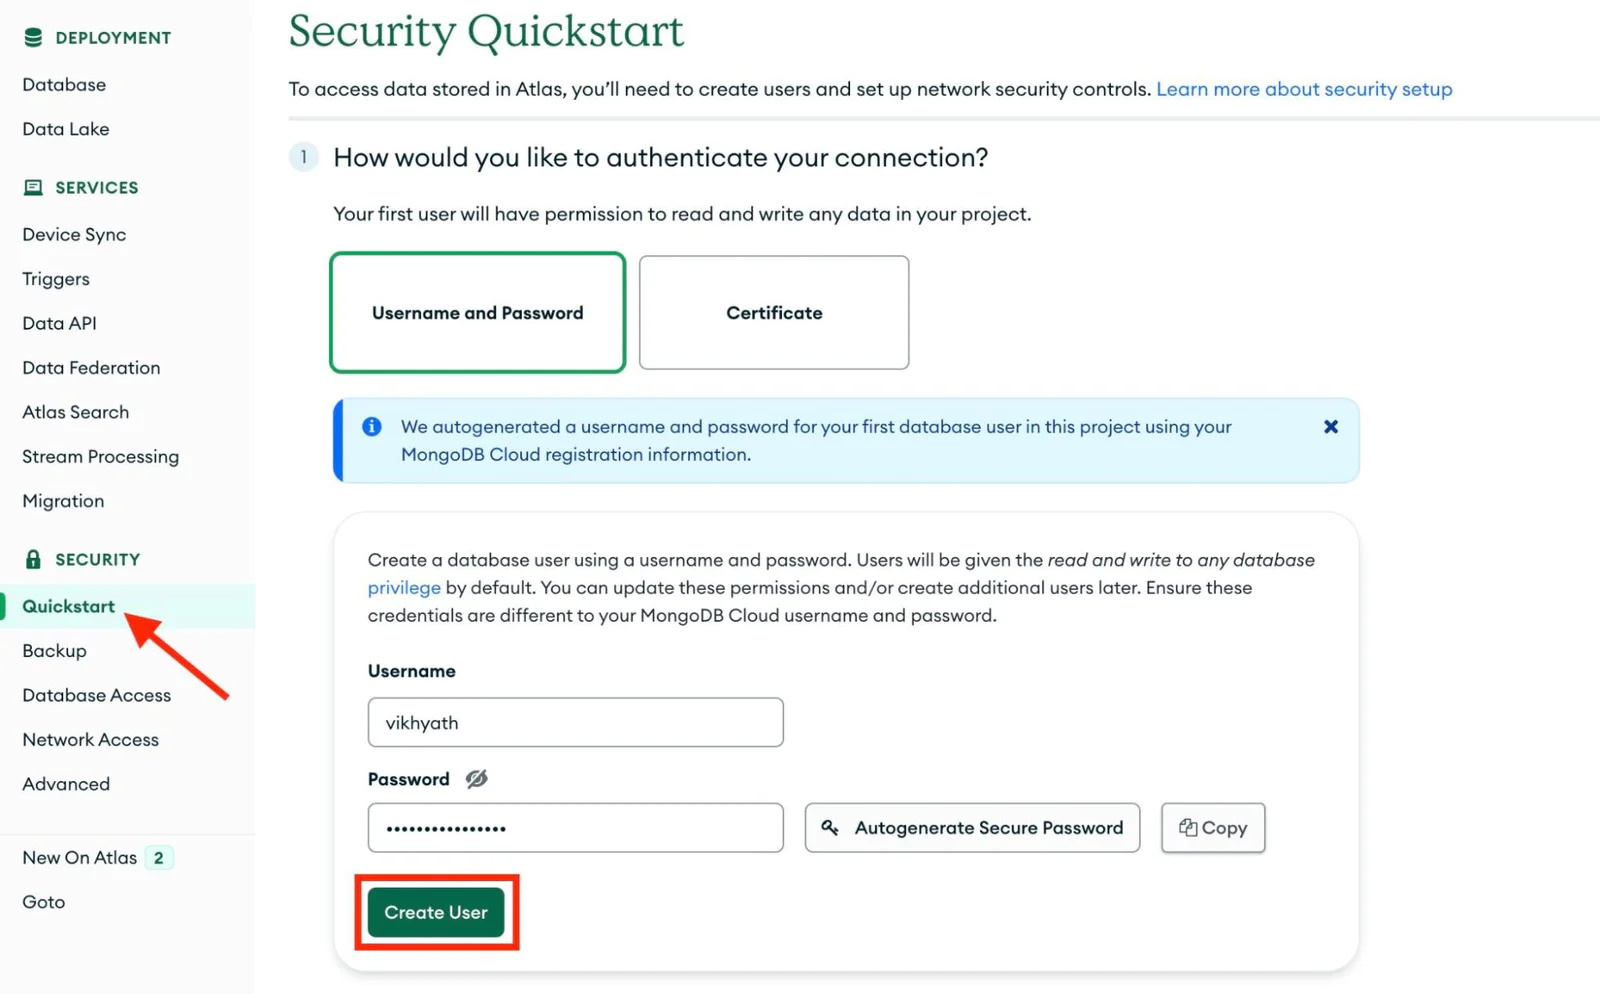 Image displaying the 'Security Quickstart' interface in MongoDB. The image is divided into two sections: a left sidebar and a configuration section. Within the configuration section, the option for 'username and password' authentication is selected. Additionally, there are fields for entering a username and password.  A 'Create User' button is highlighted within a red rectangular box.